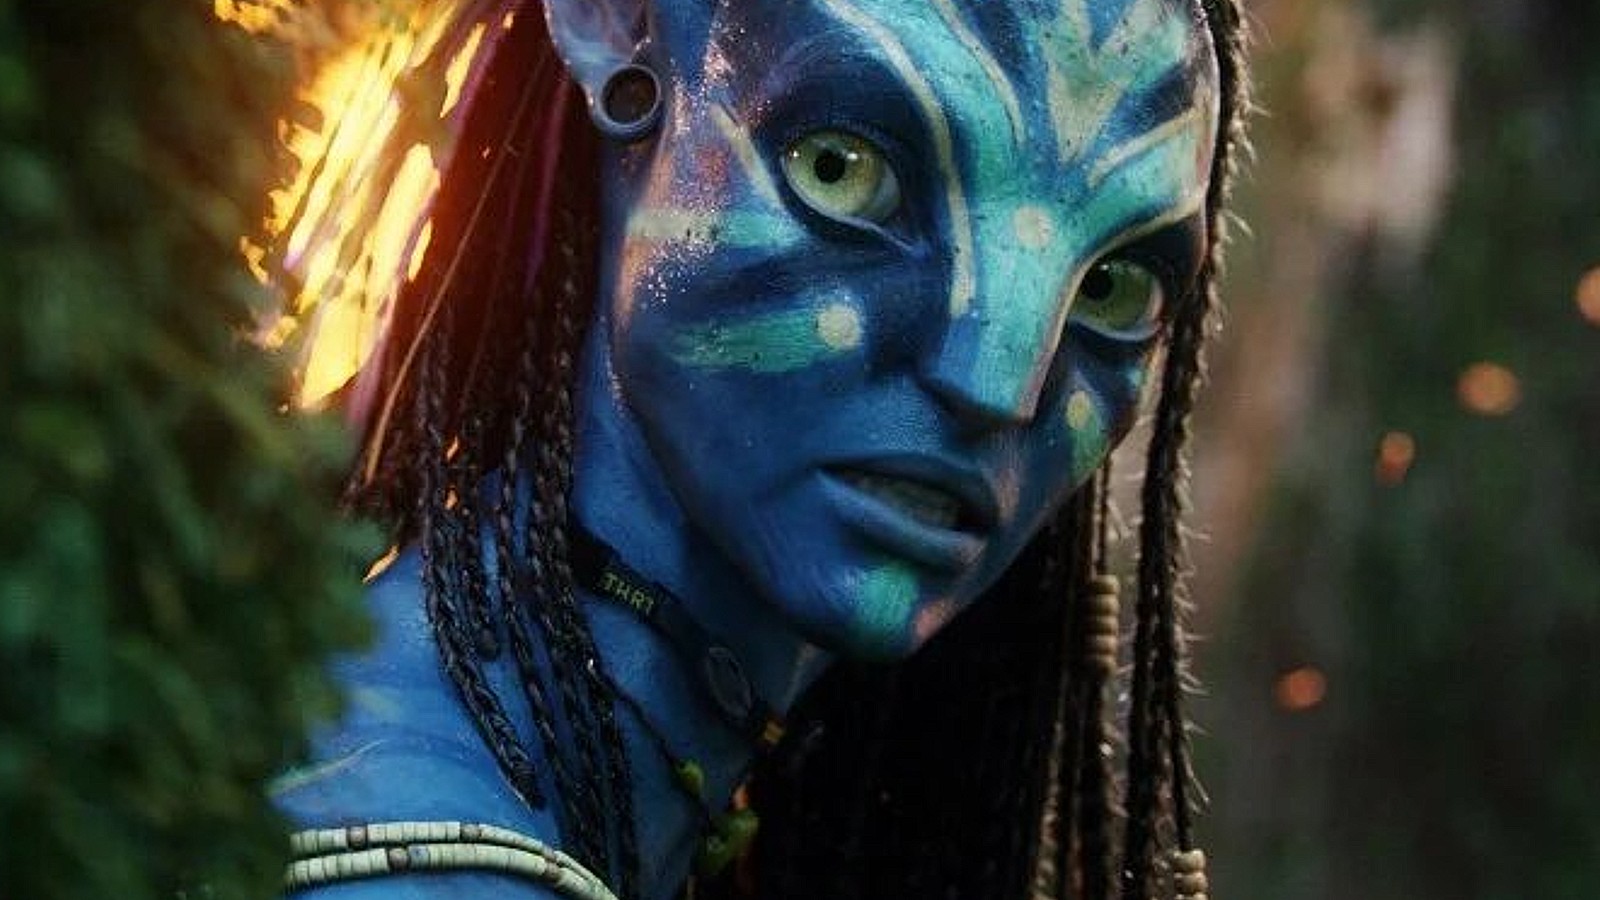 How many Avatar movies are there?